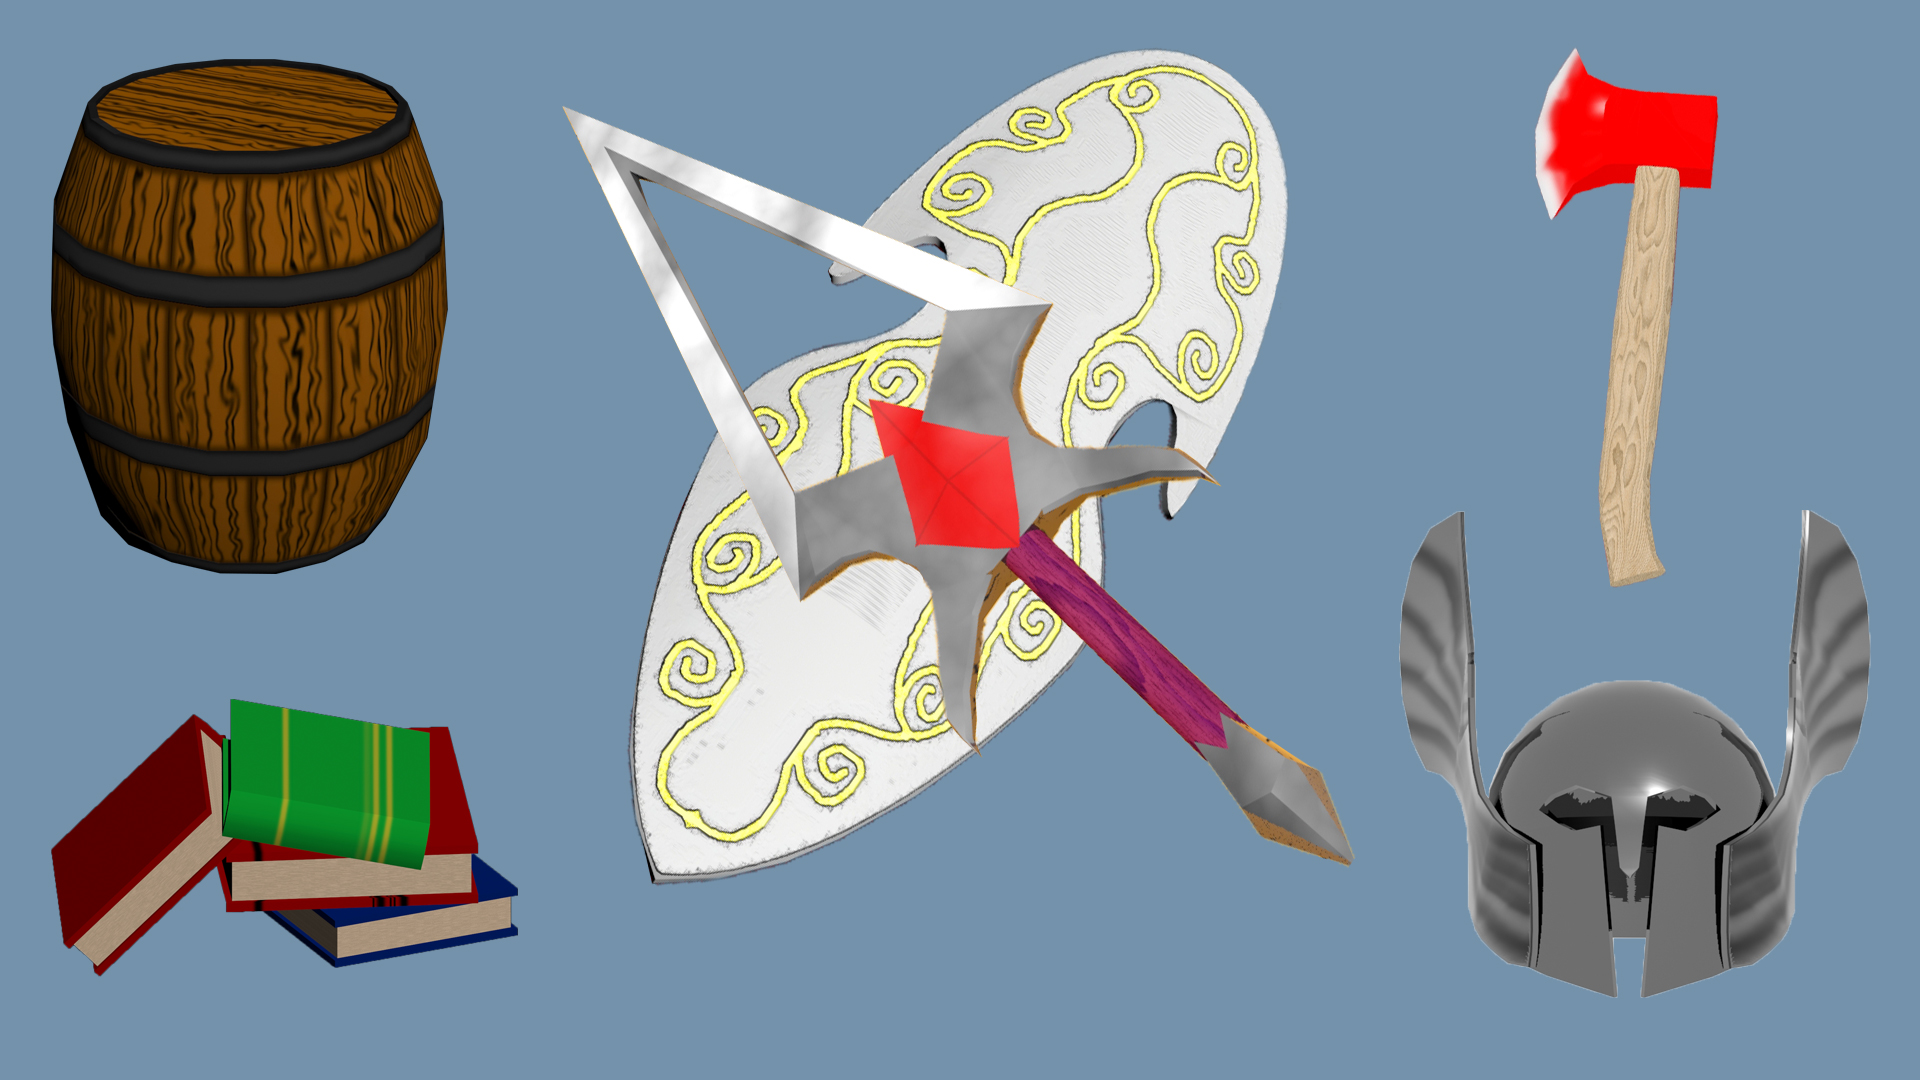 Image of a 3D rendered metal helmet with wings on the side.